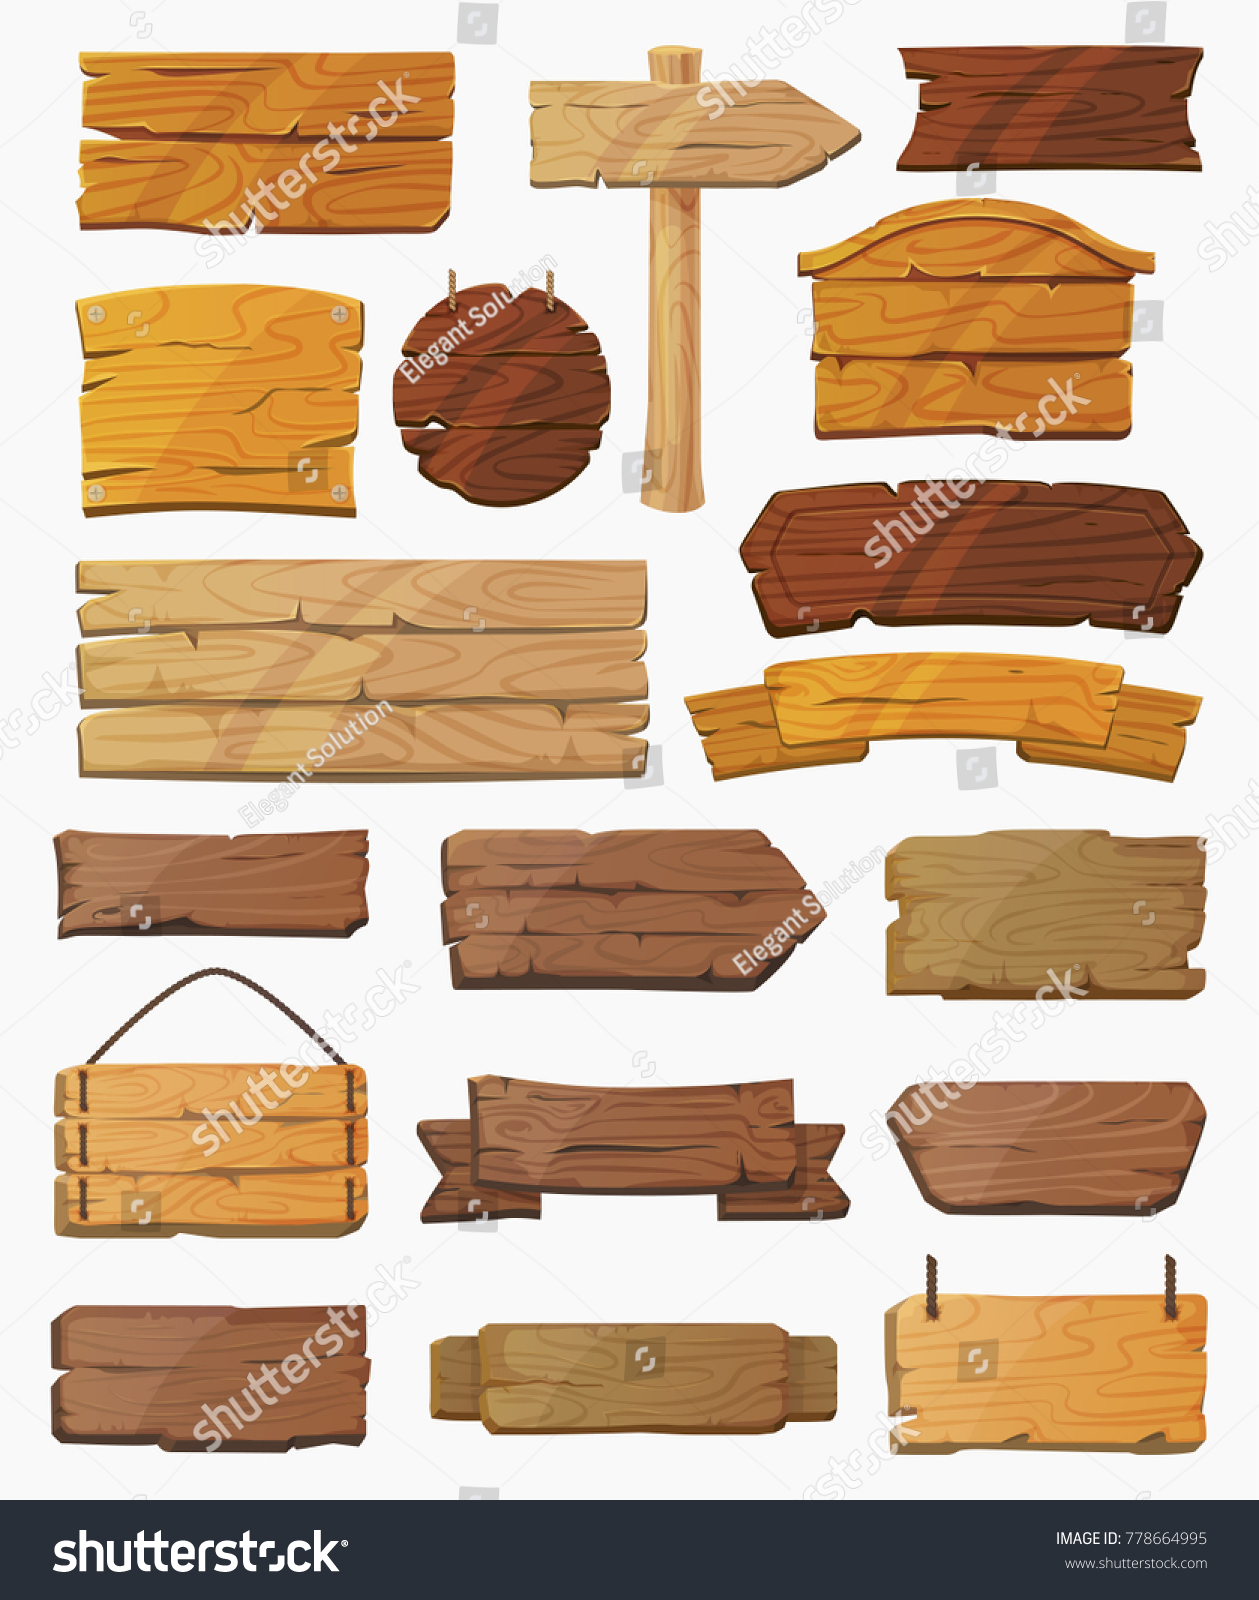 Blank or empty, clear isolated wooden planks or signboards. Set of vintage or old, retro banners with nails. Signs for messages or pointers with arrow for pathfinding. Signpost at desert, information